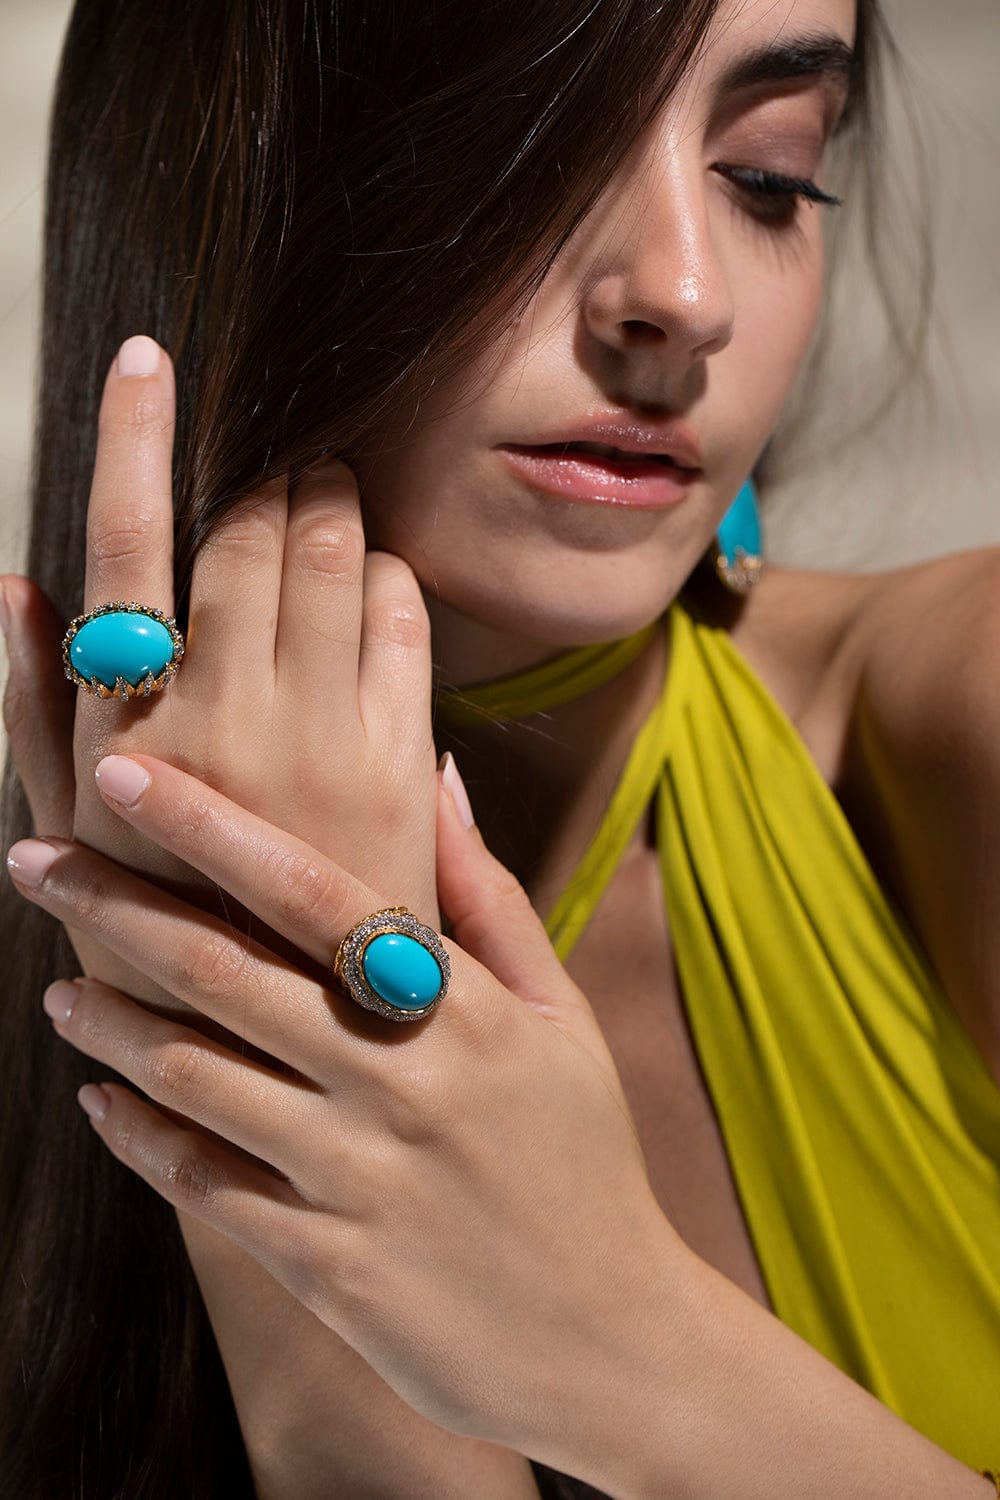 Sonoran Gold Turquoise Ring – Luchia Fine Jewelry